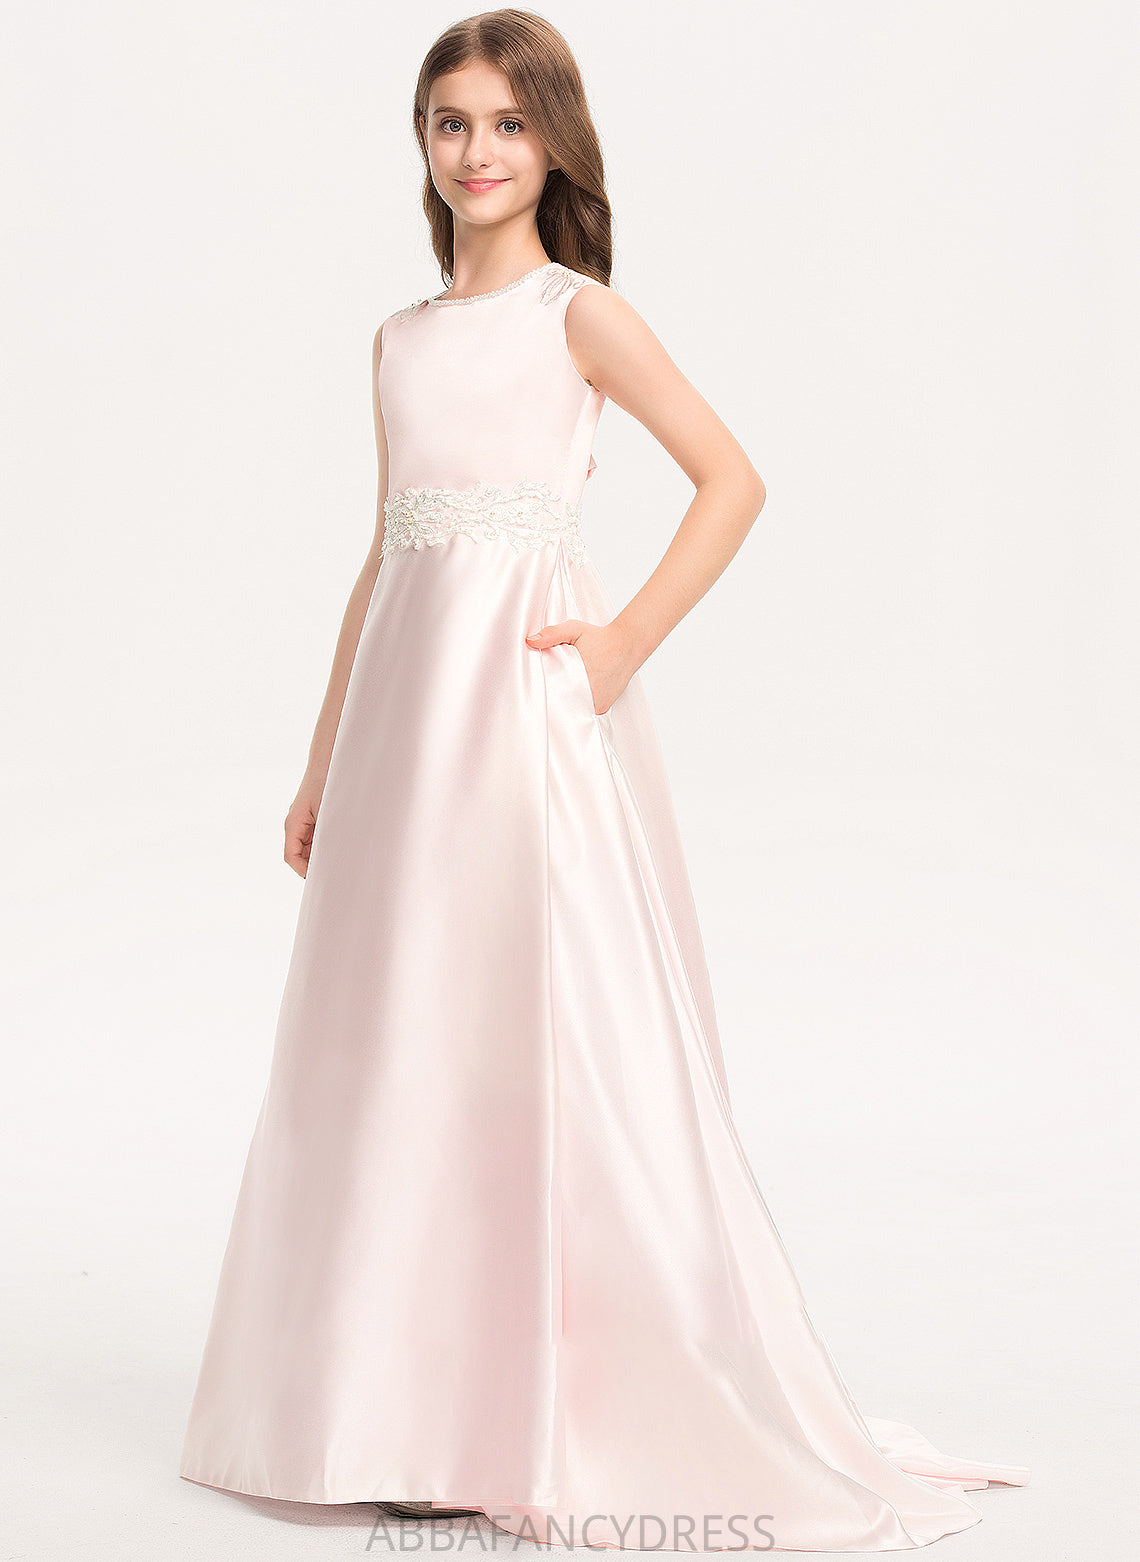 Junior Bridesmaid Dresses Neck Lace Bow(s) A-Line Sweep Satin With Scoop Train Samantha Pockets